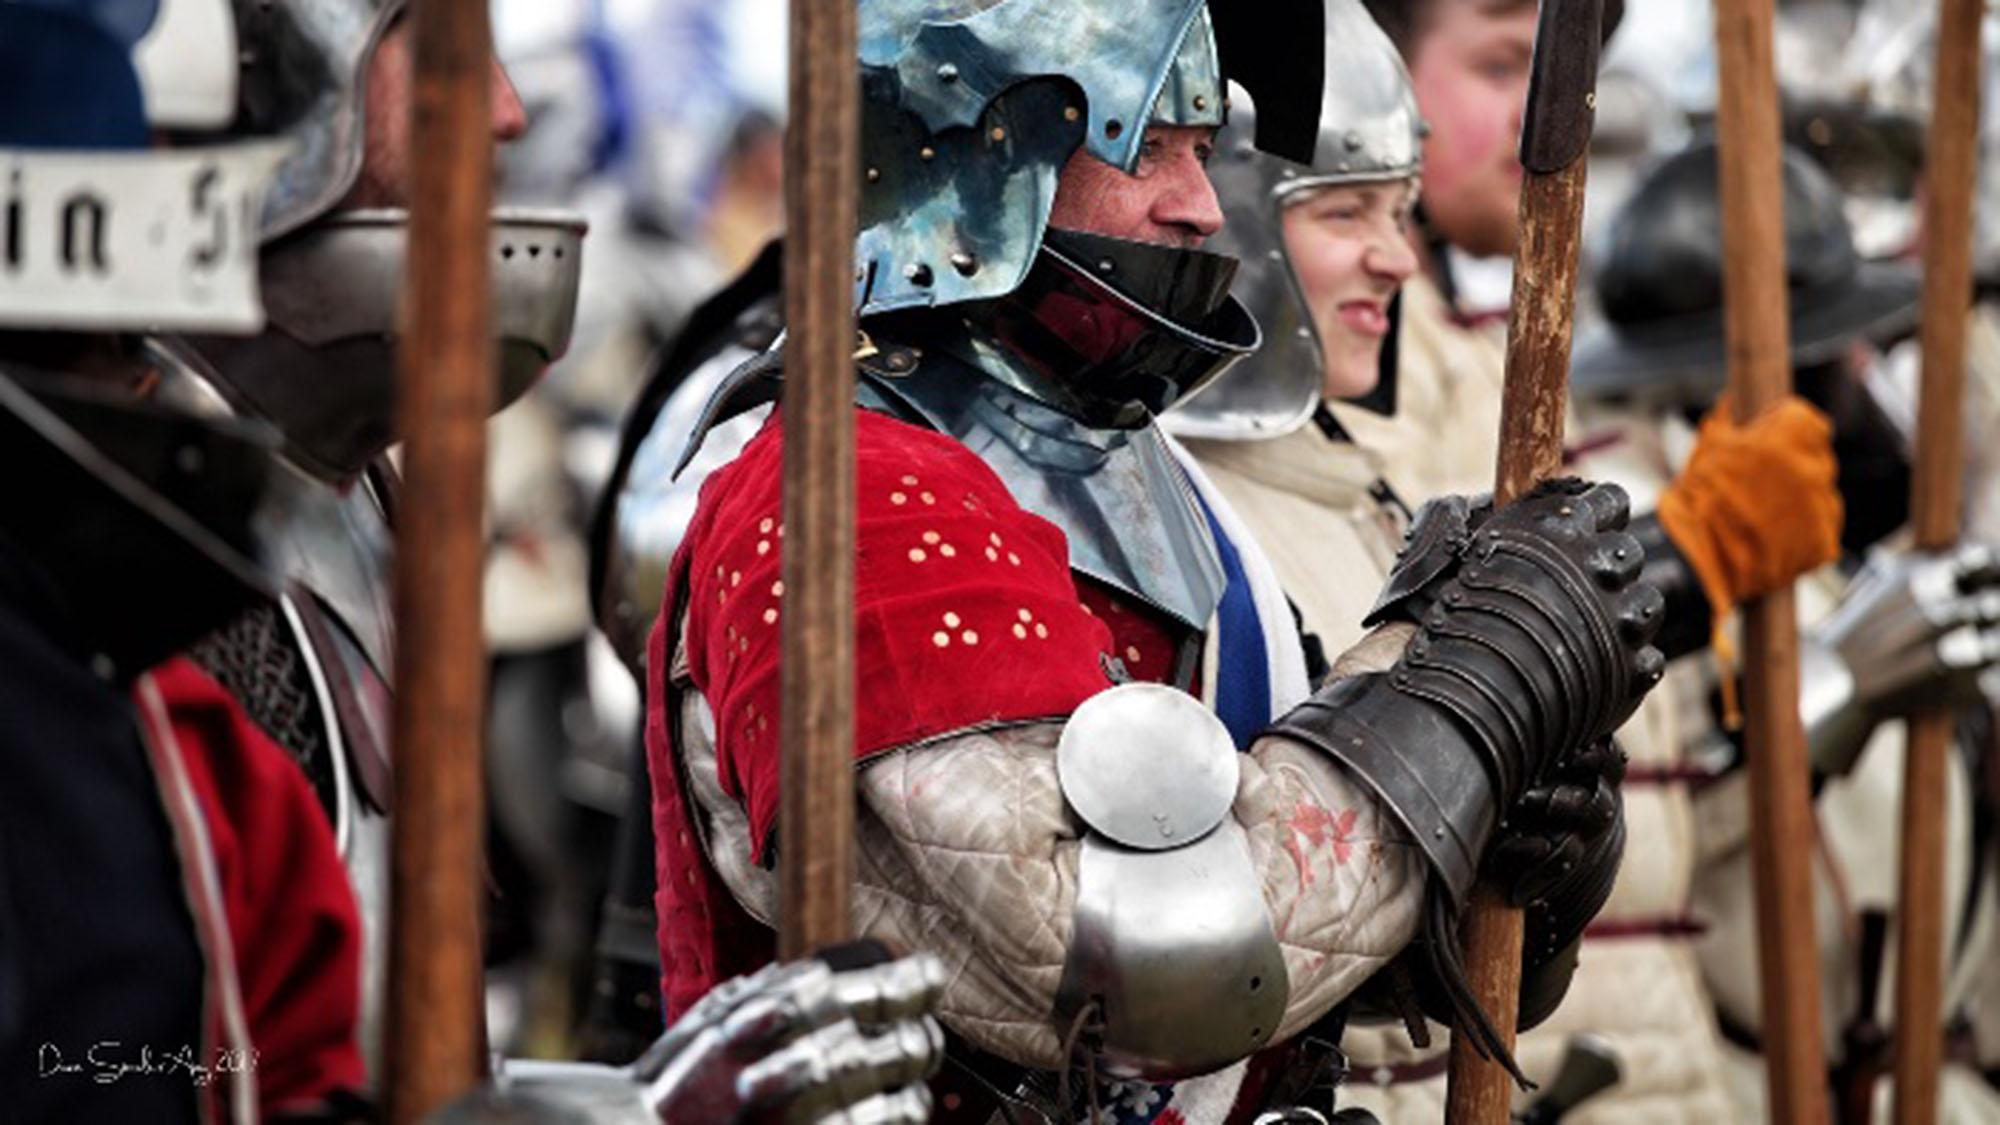 Re-enactors dressed in suits of armour carrying pikes